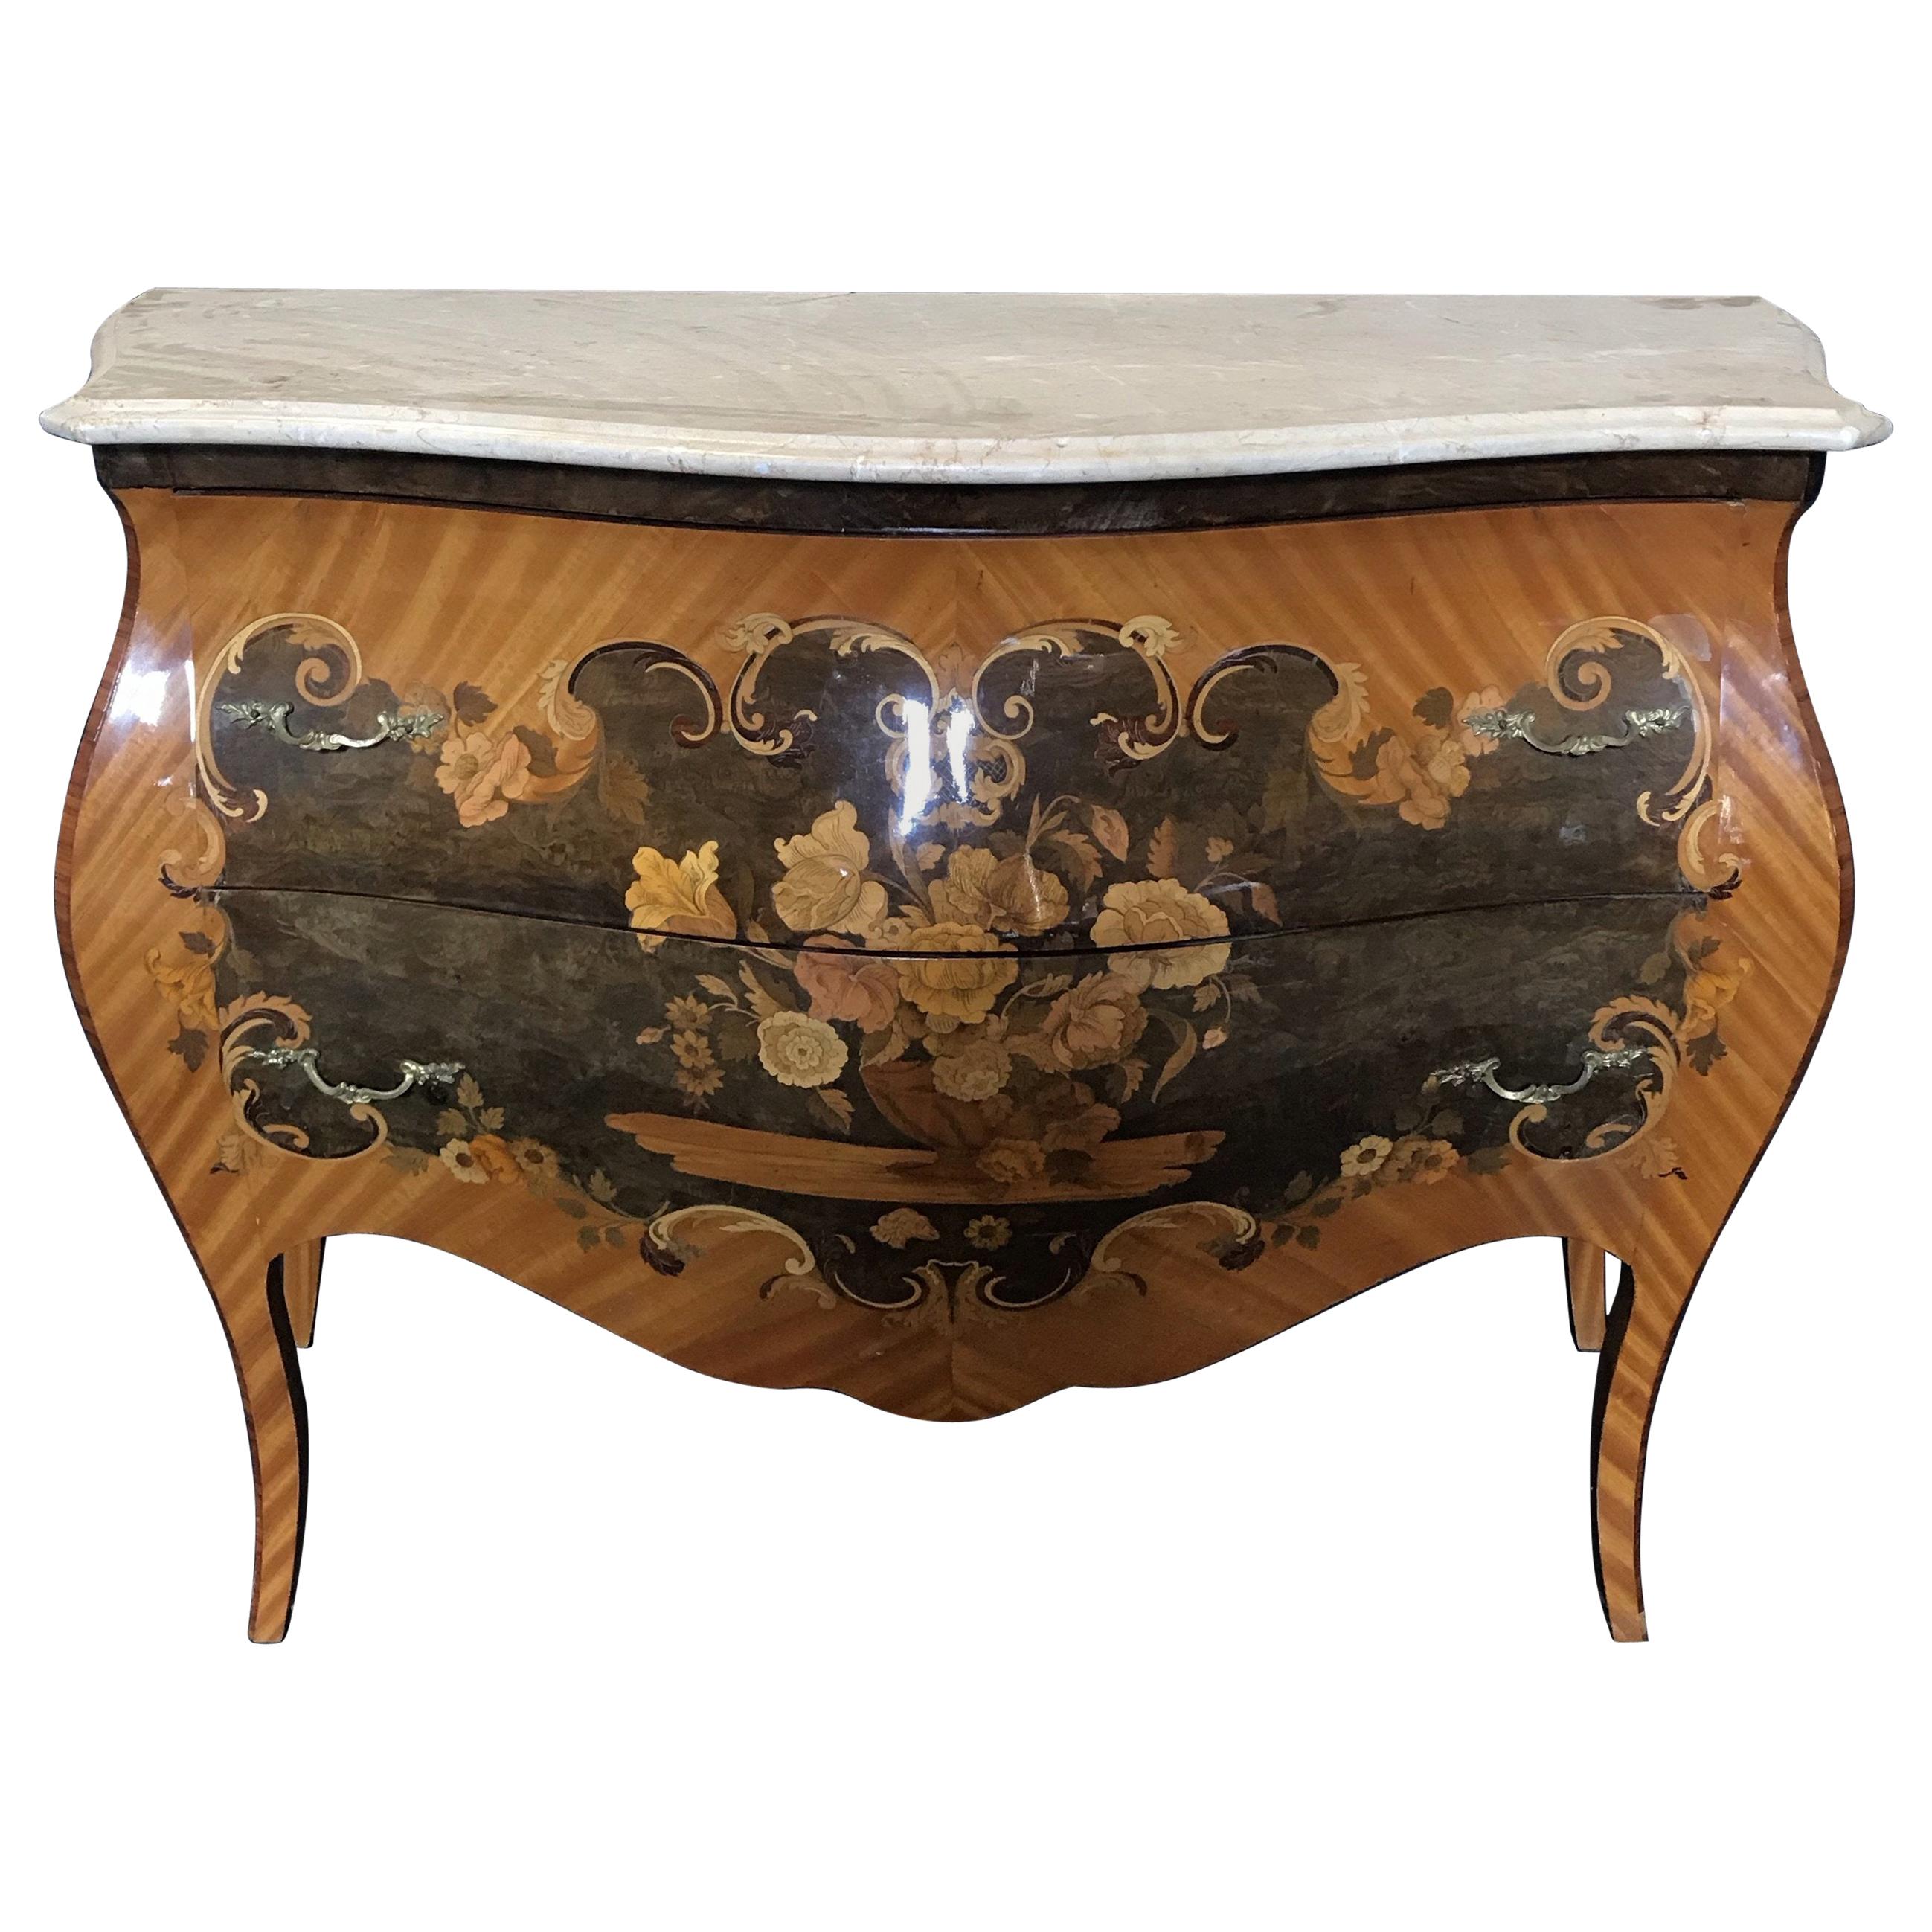 Beautiful French Marble Topped Louis XVI Bombe Commode with Intricate Marquetry